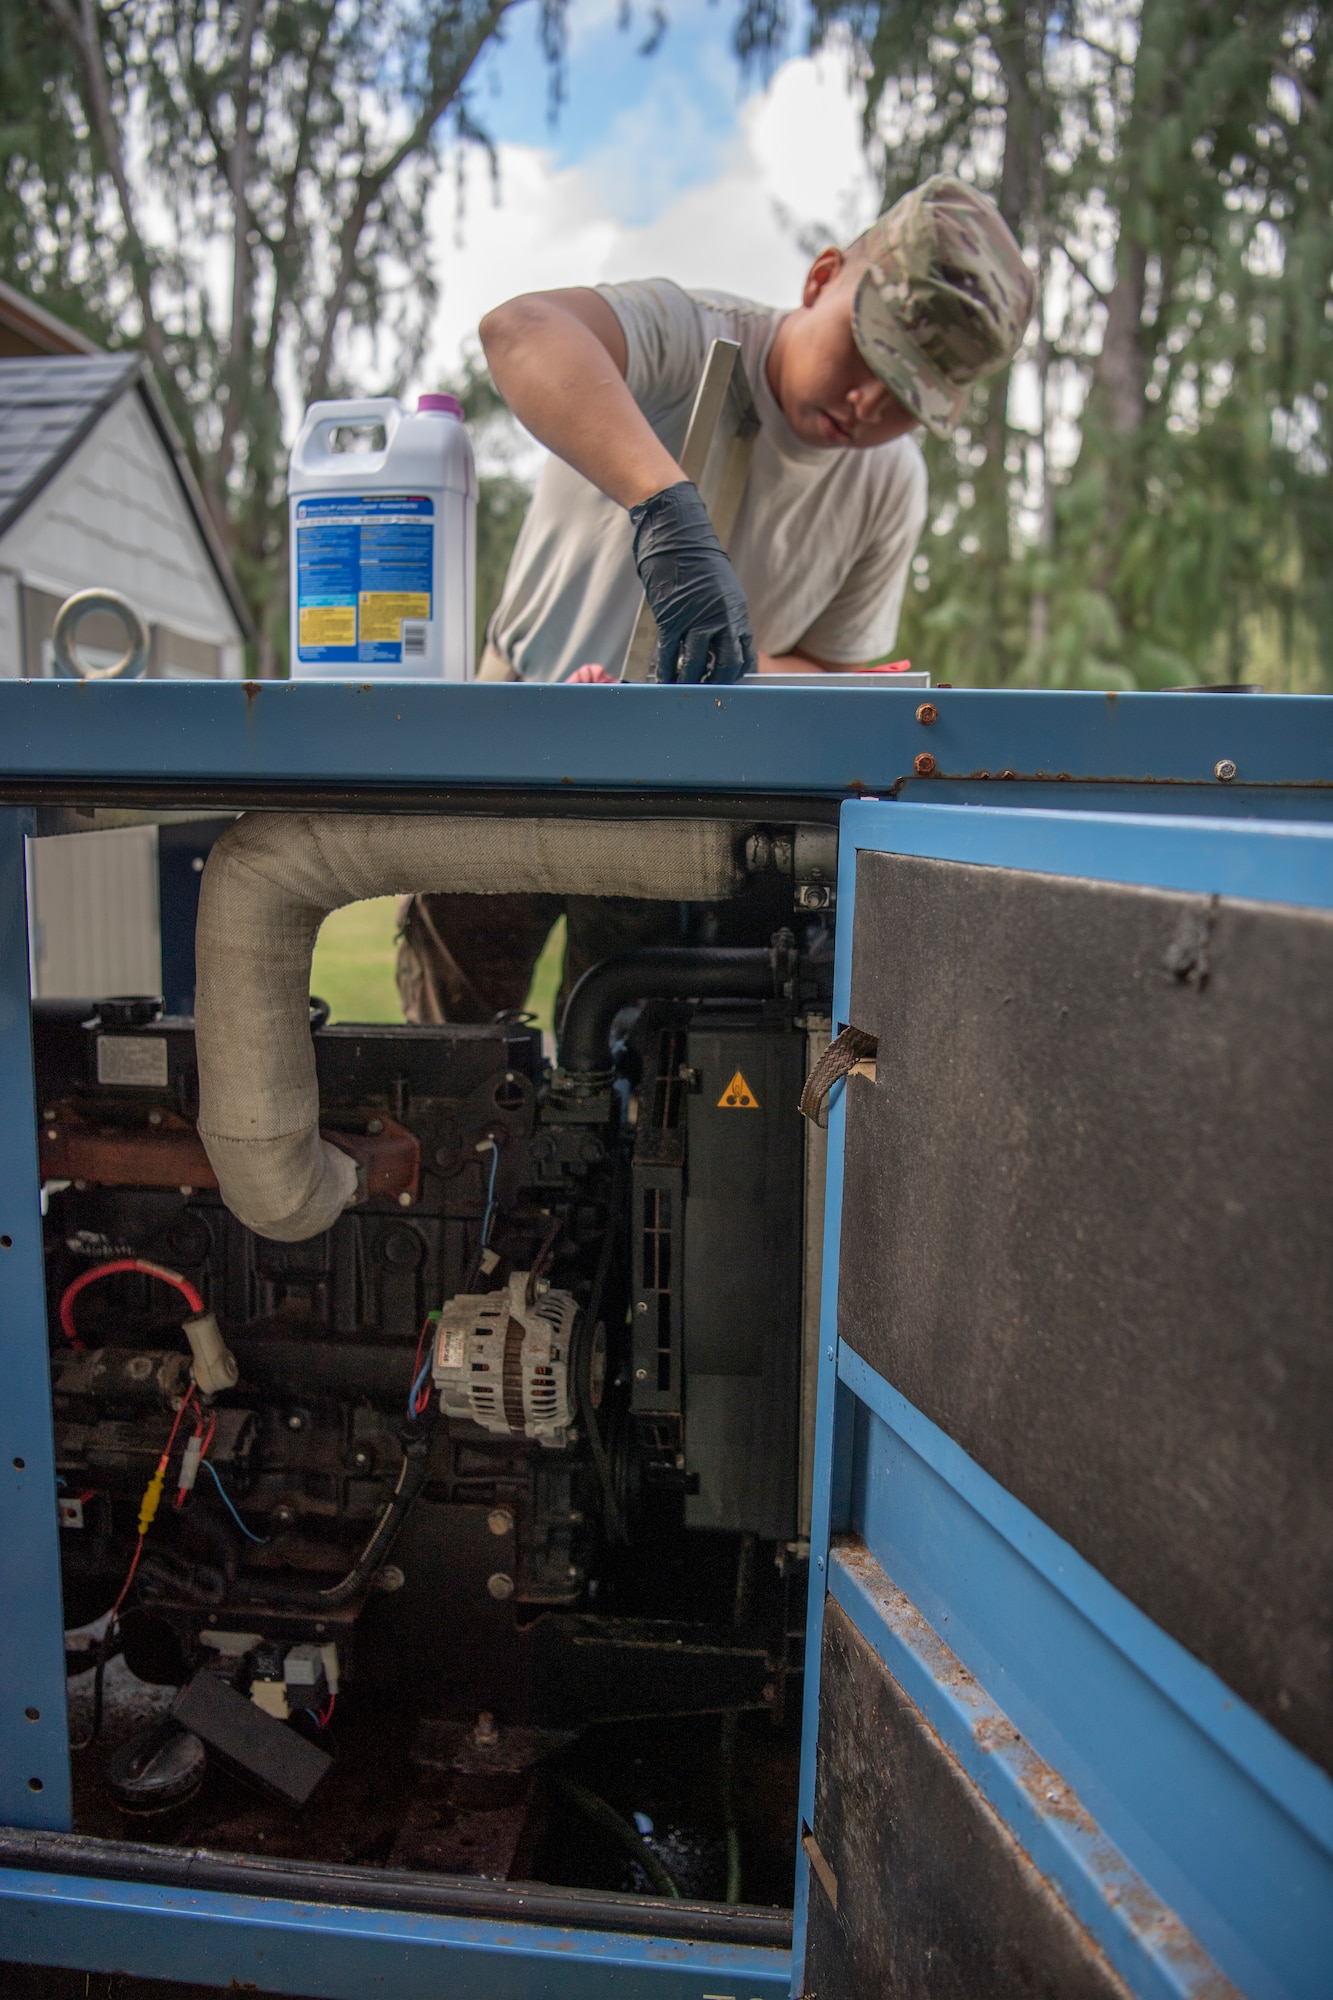 U.S. Air Force Staff Sgt. Gabriel Carias, 624th Civil Engineer Squadron electrical power production craftsman, prepares to put antifreeze into an electrical generator at Bellows Air Force Station, Hawaii, Jan. 25, 2020.